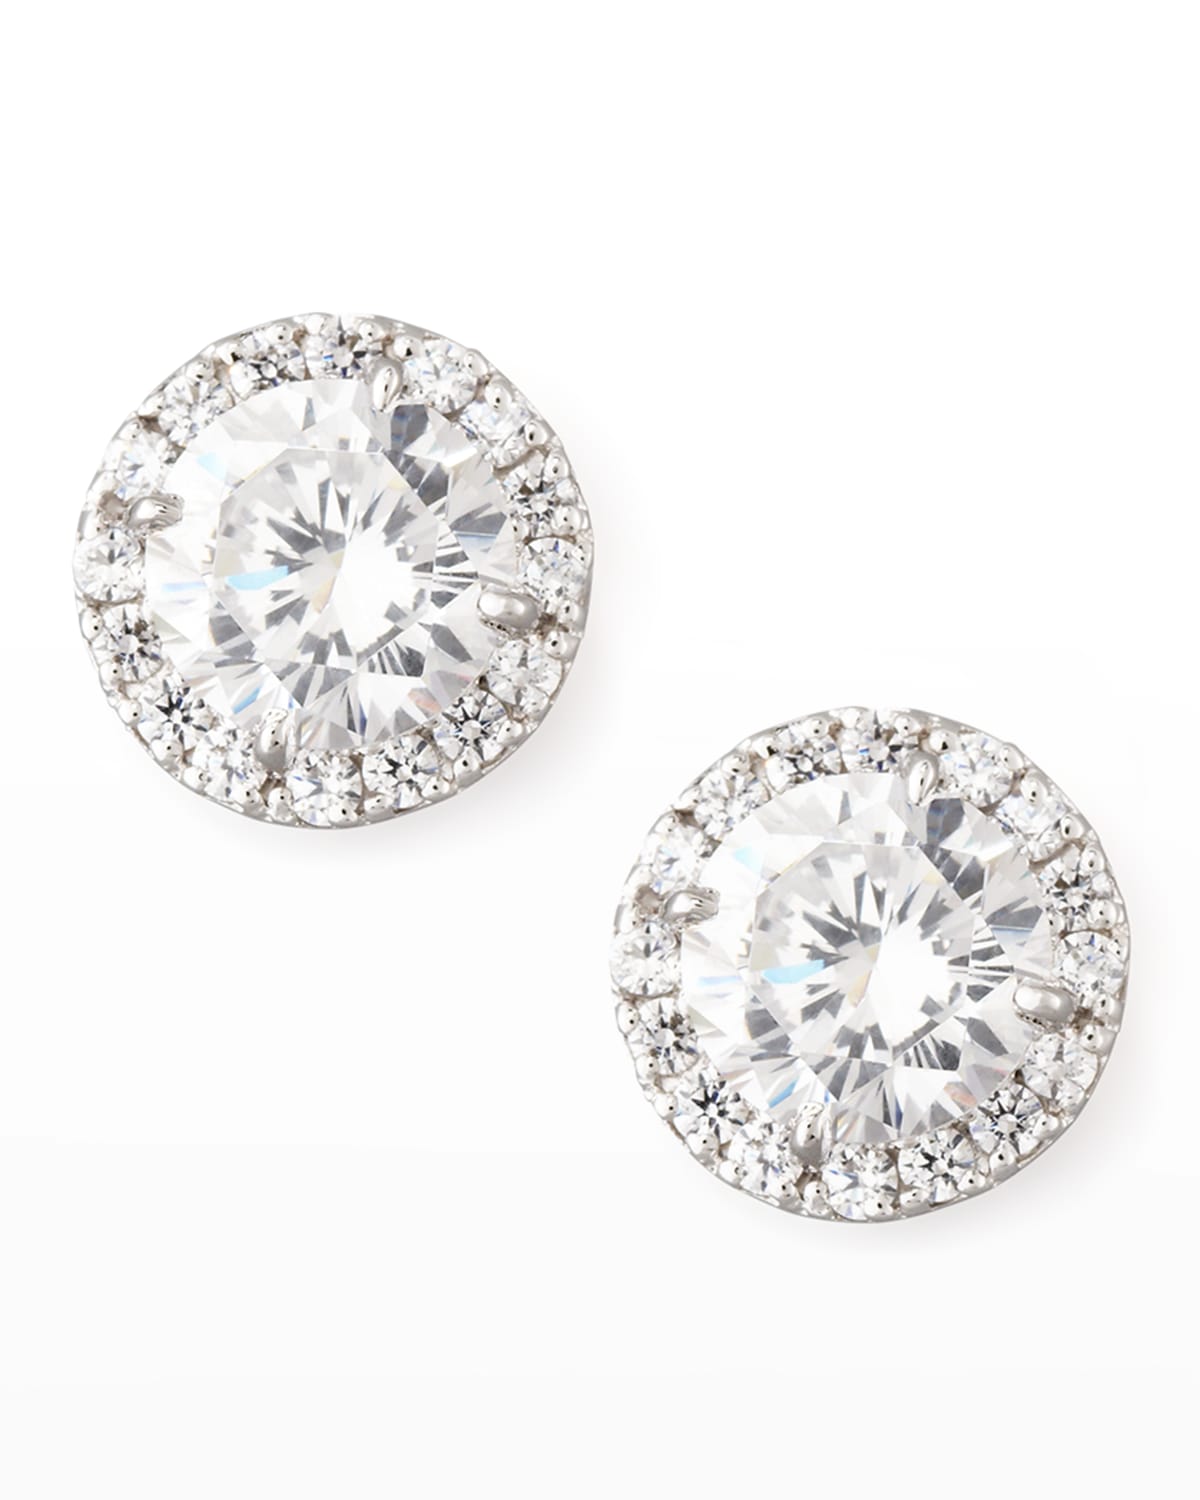 Fantasia By Deserio Sterling Silver 1.5ct Pave Stud Earrings In Clear